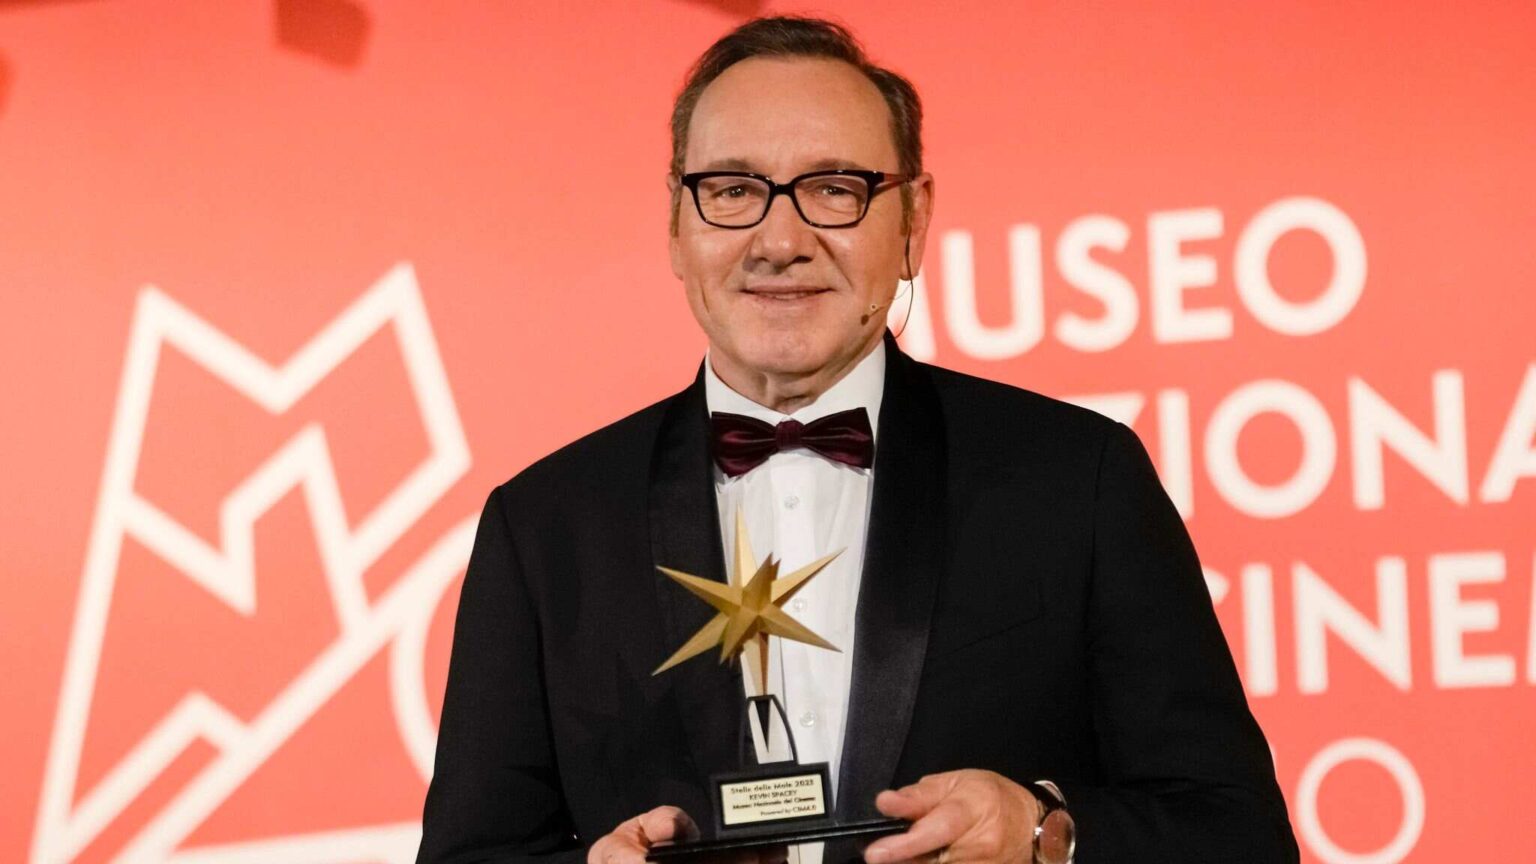 Kevin Spacey given acting award in Italy amid allegations of sexual misconduct